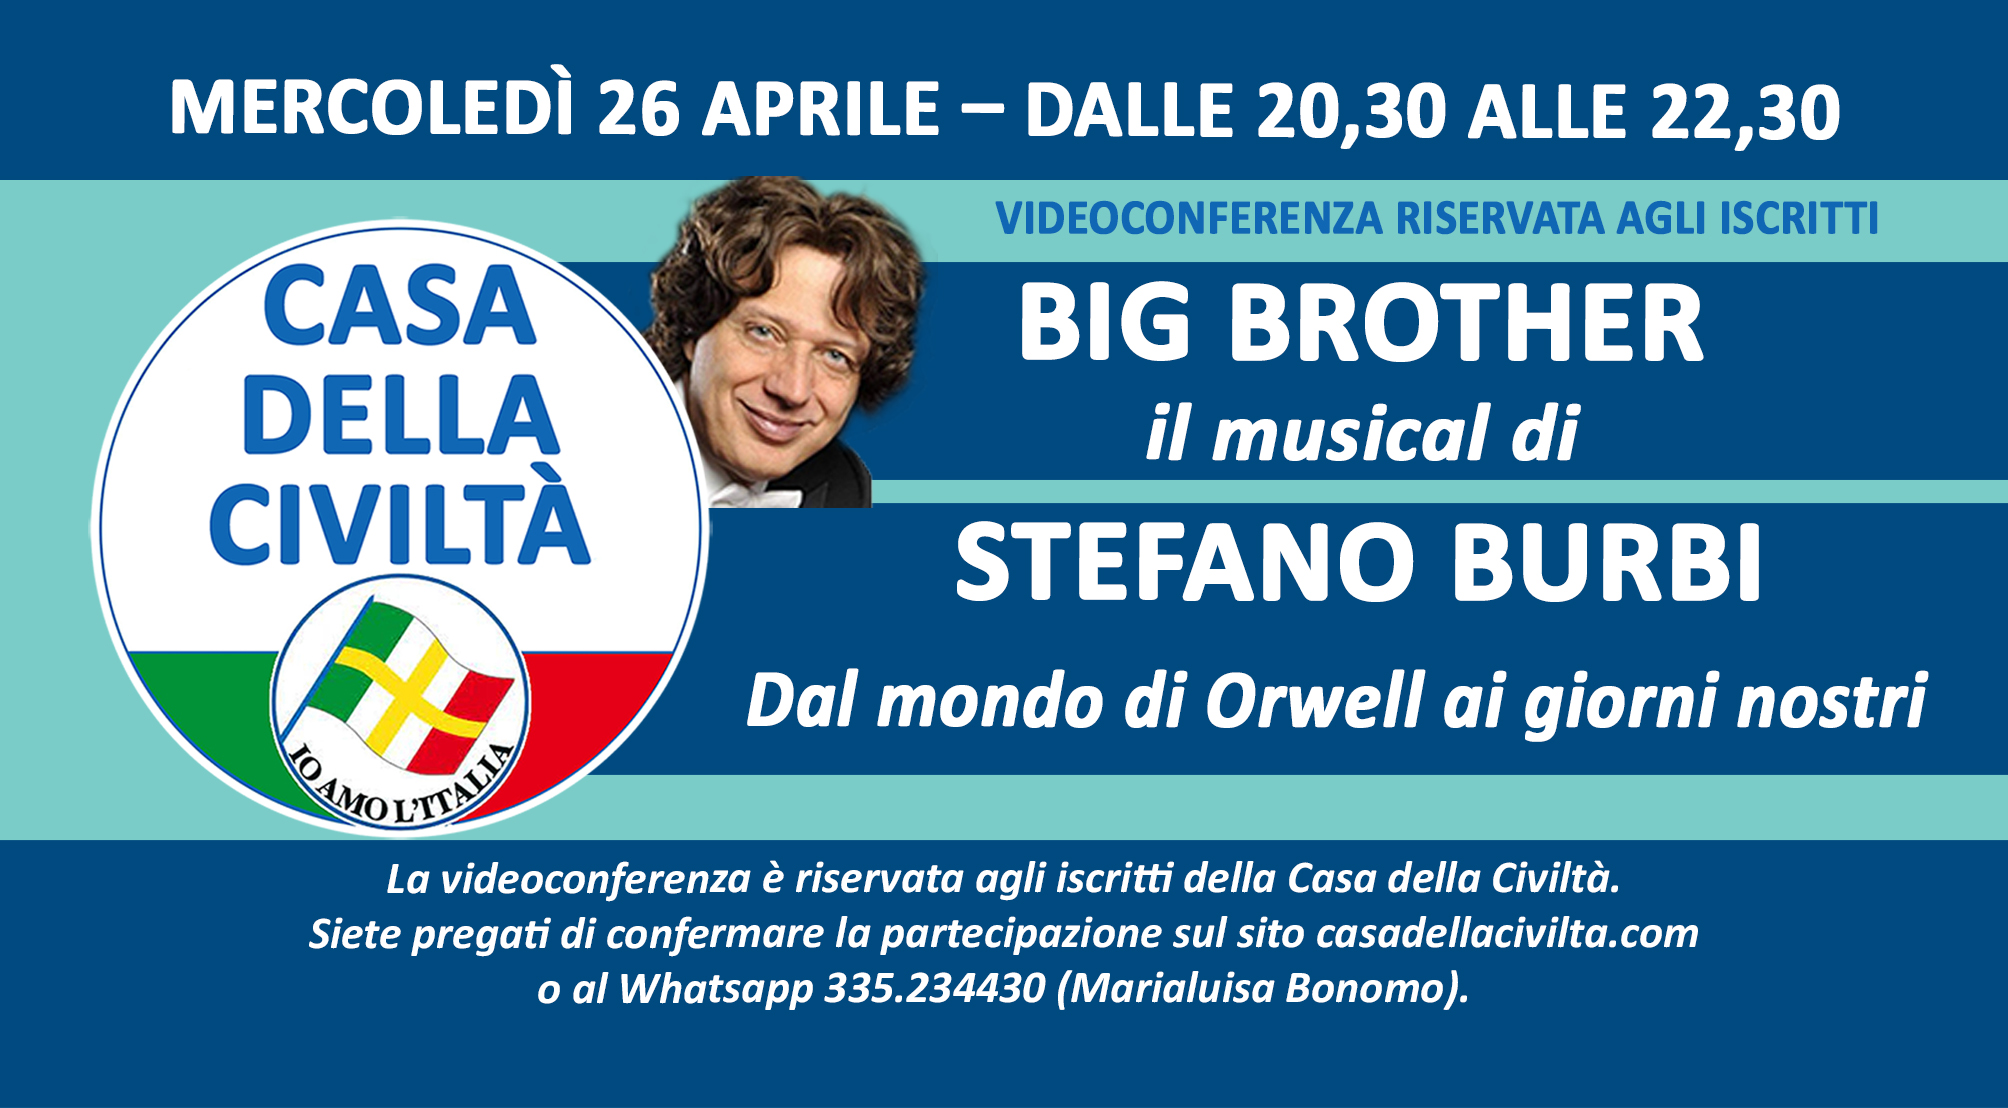 Videoconferenza di <strong>STEFANO BURBI</strong> sul suo Musical <strong>“BIG BROTHER”</strong> (Mercoledì 26 aprile, ore 20,30)”/></a></div><h2 class=